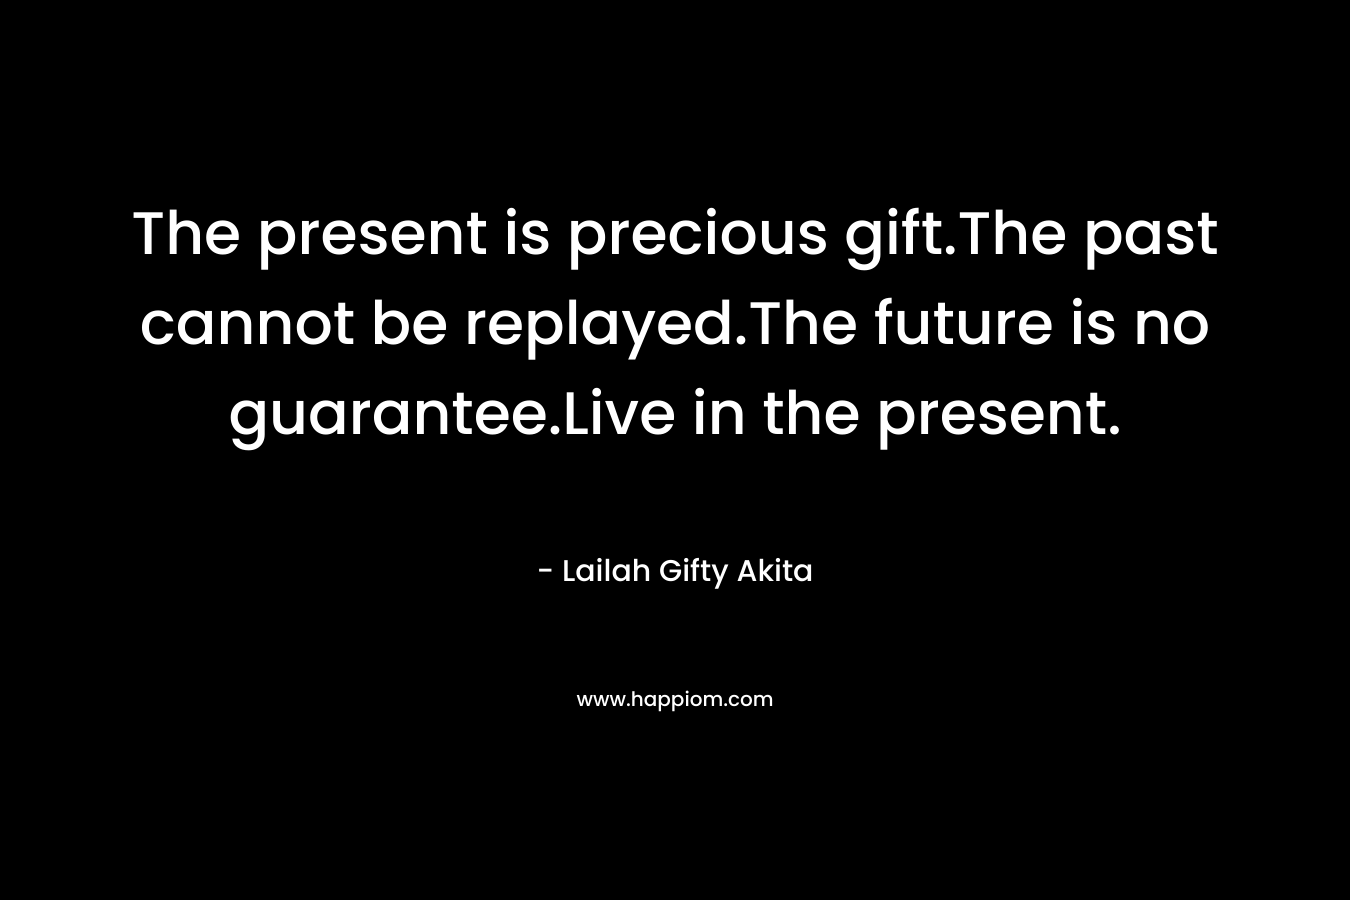 The present is precious gift.The past cannot be replayed.The future is no guarantee.Live in the present. – Lailah Gifty Akita